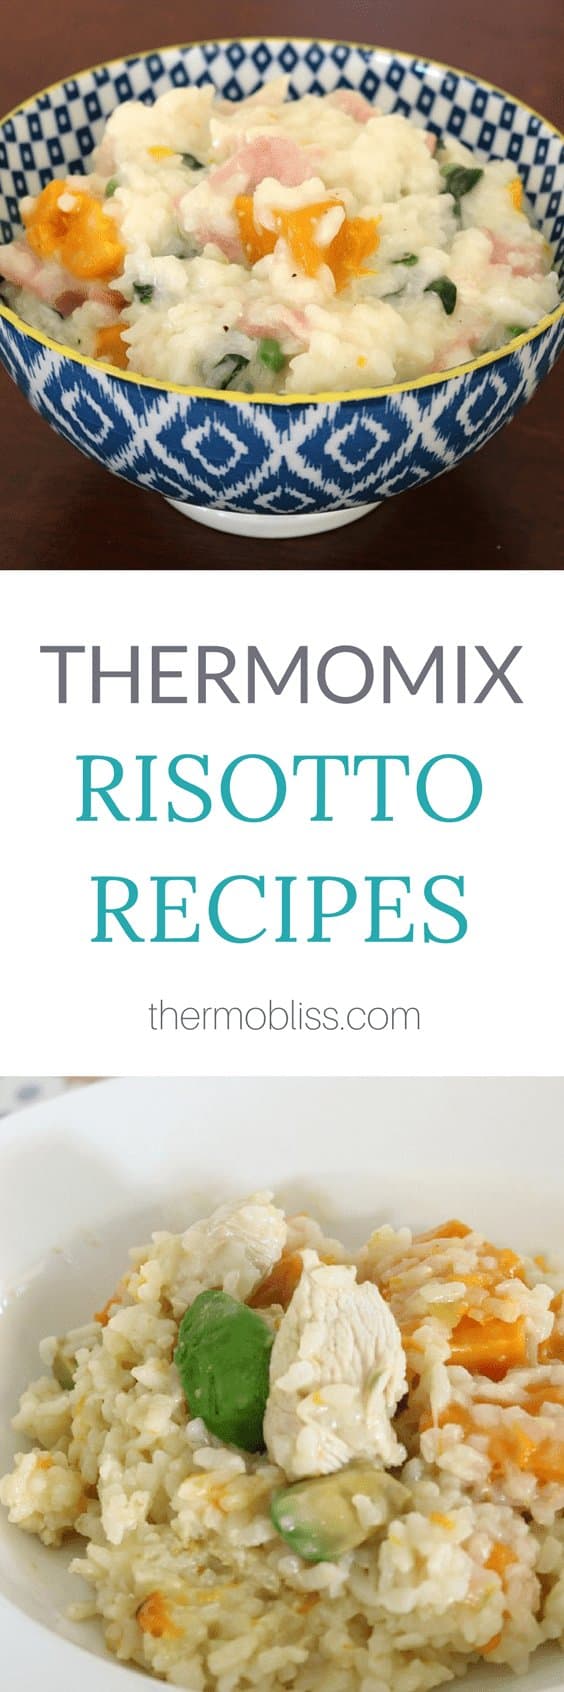 Our Favourite Thermomix Risotto Recipes - Thermobliss